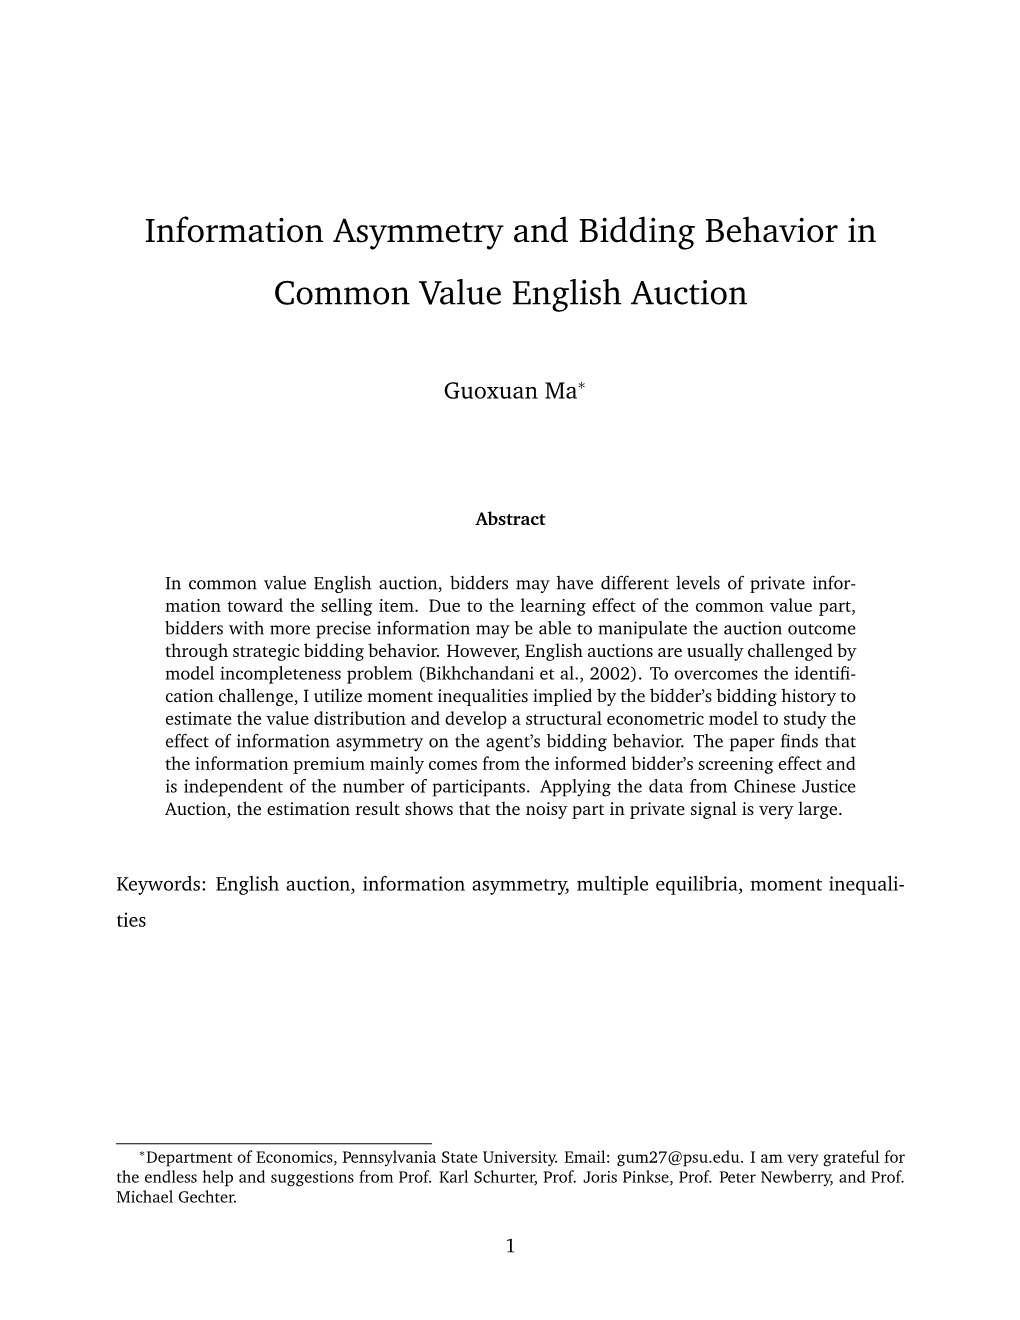 Information Asymmetry and Bidding Behavior in Common Value English Auction